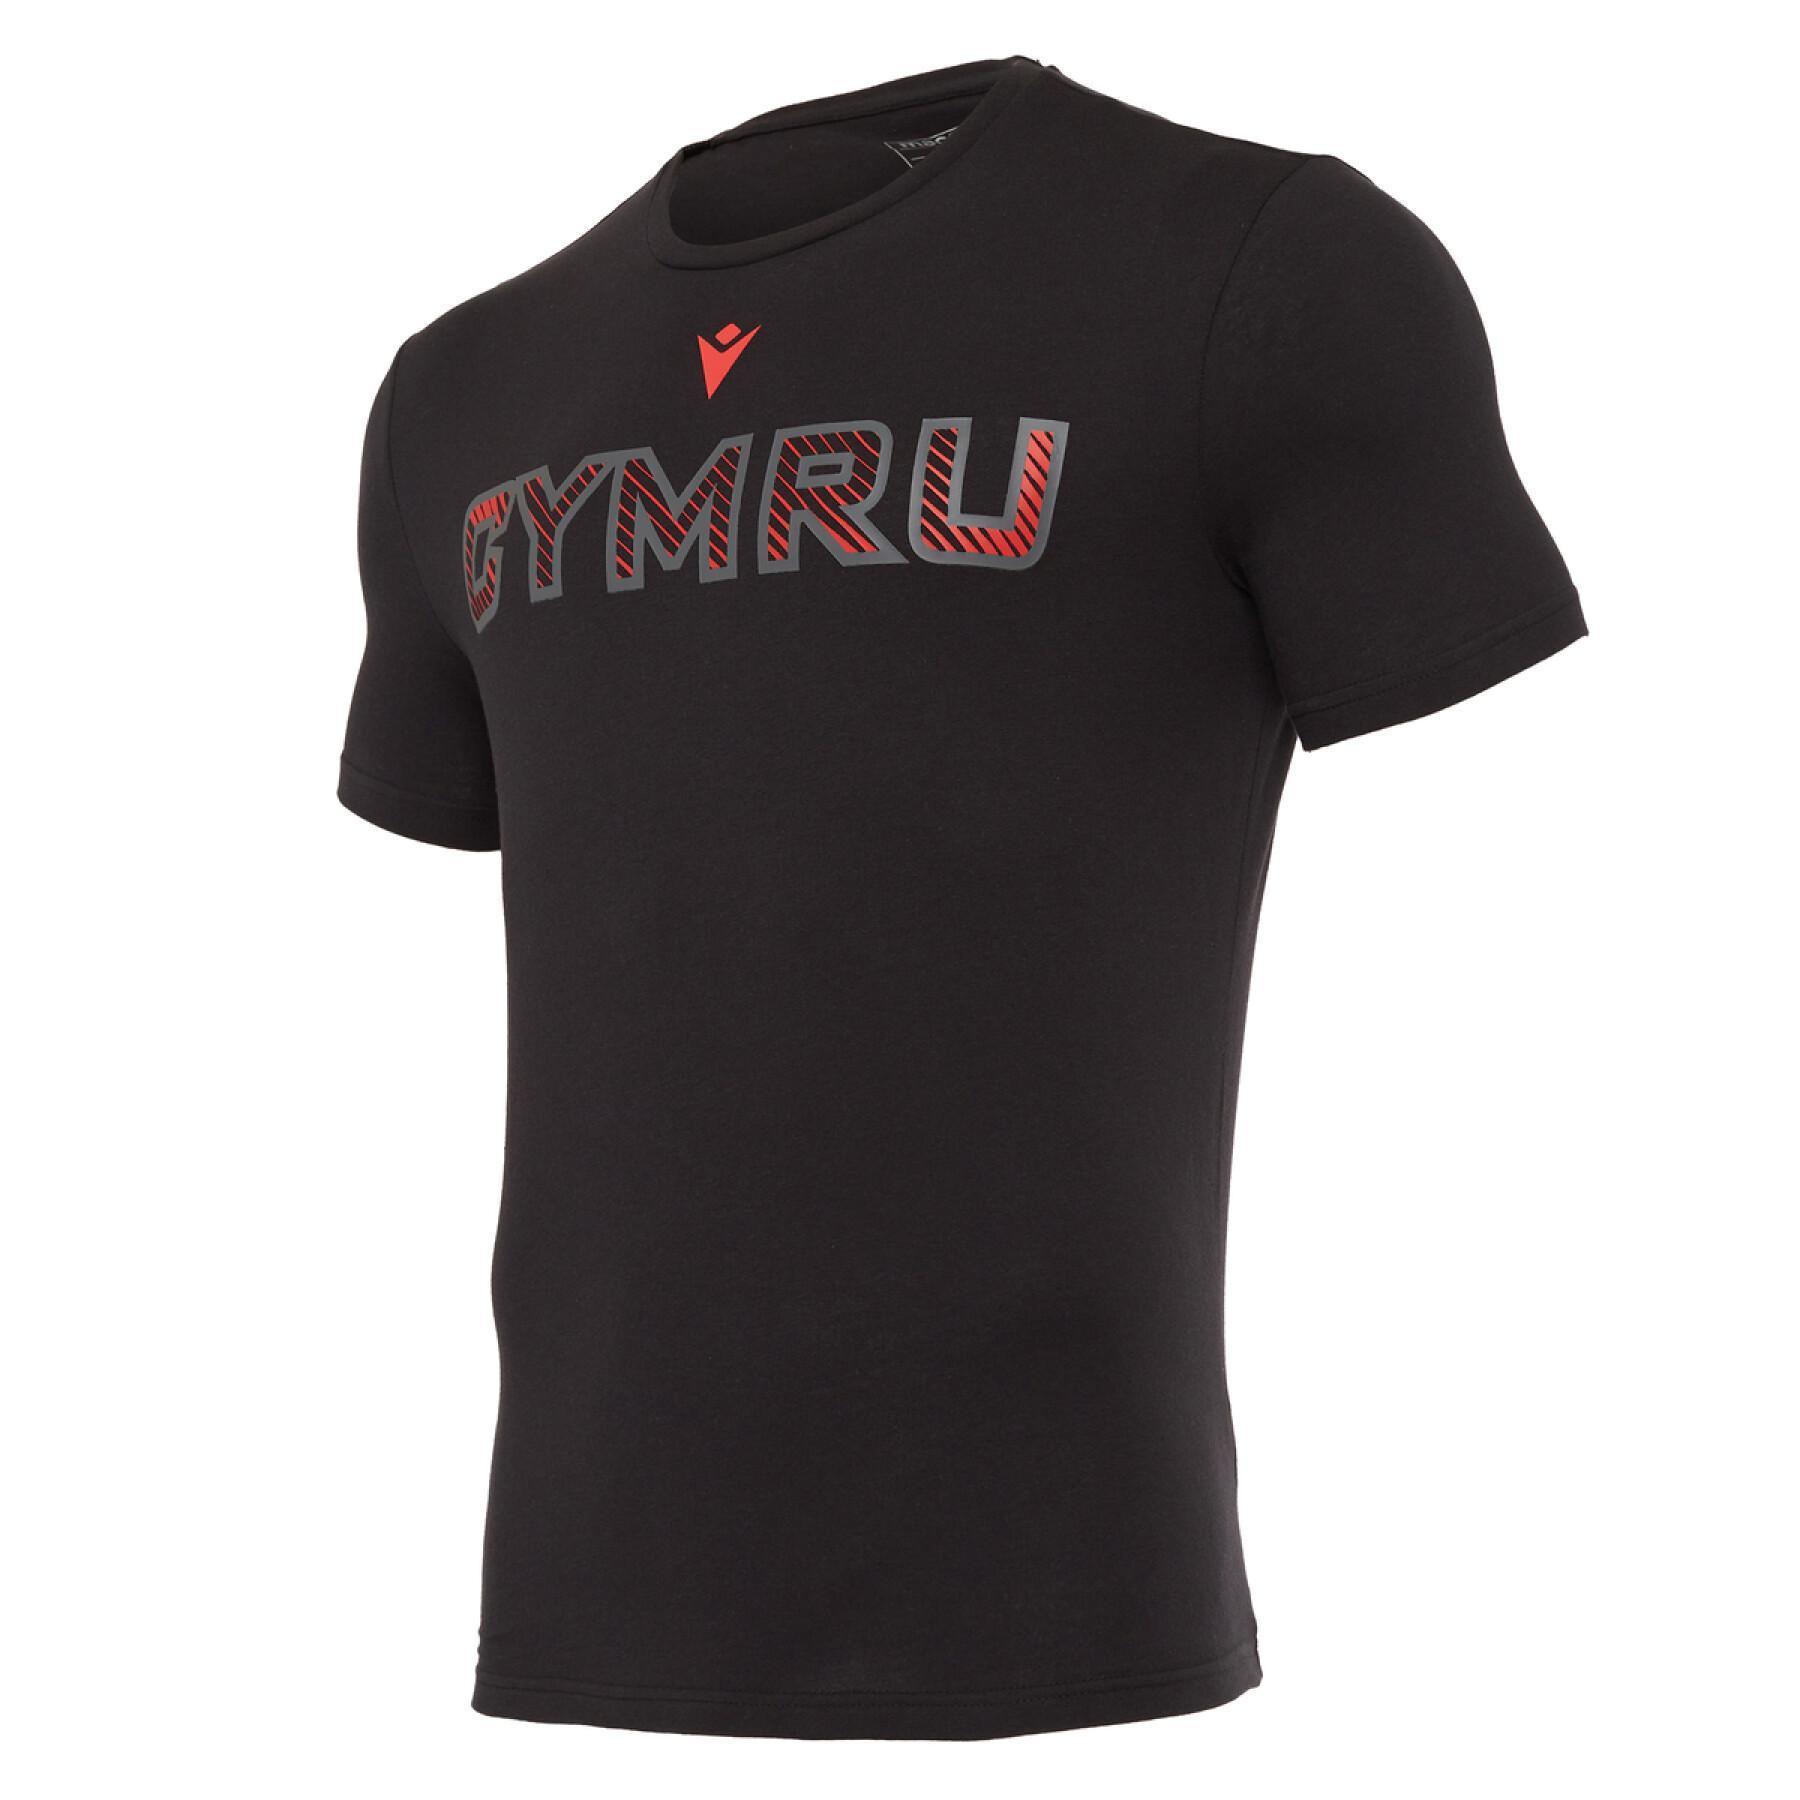 T-shirt travel Pays de Galles rugby 2020/21